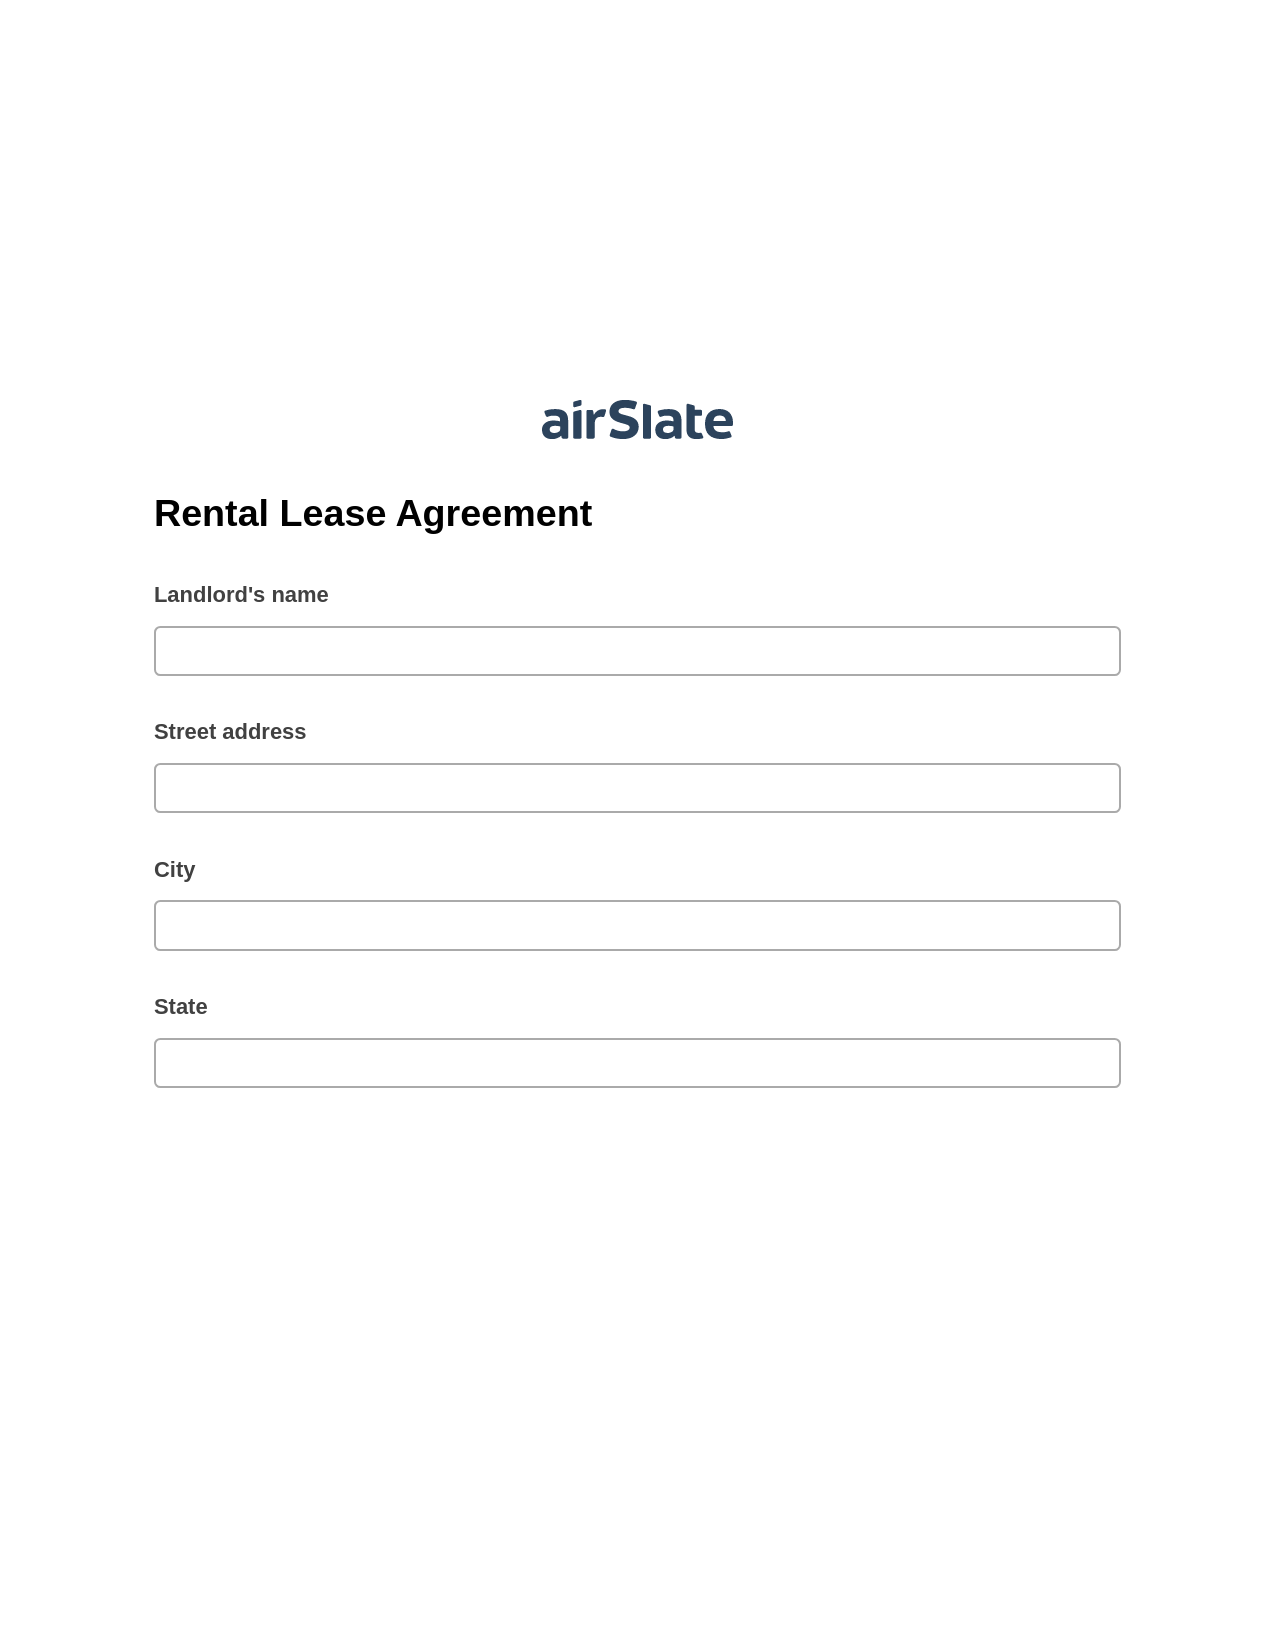 Multirole Rental Lease Agreement Pre-fill from Excel Spreadsheet Dropdown Options Bot, Create Salesforce Record Bot, Slack Notification Postfinish Bot